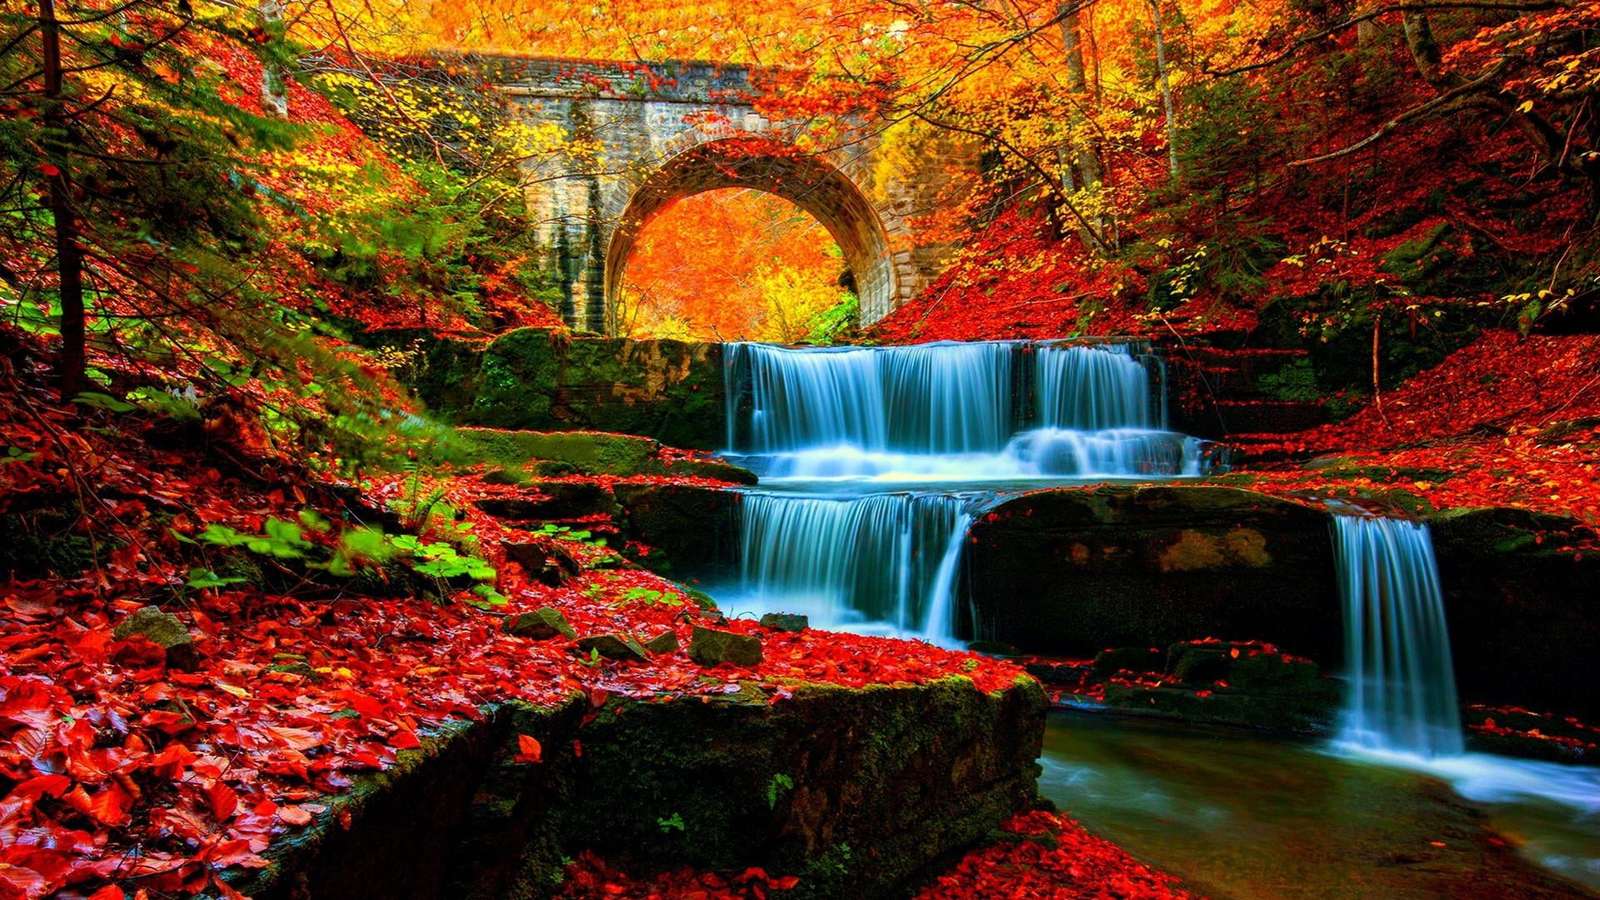 Red Leaf Bridge puzzle online from photo